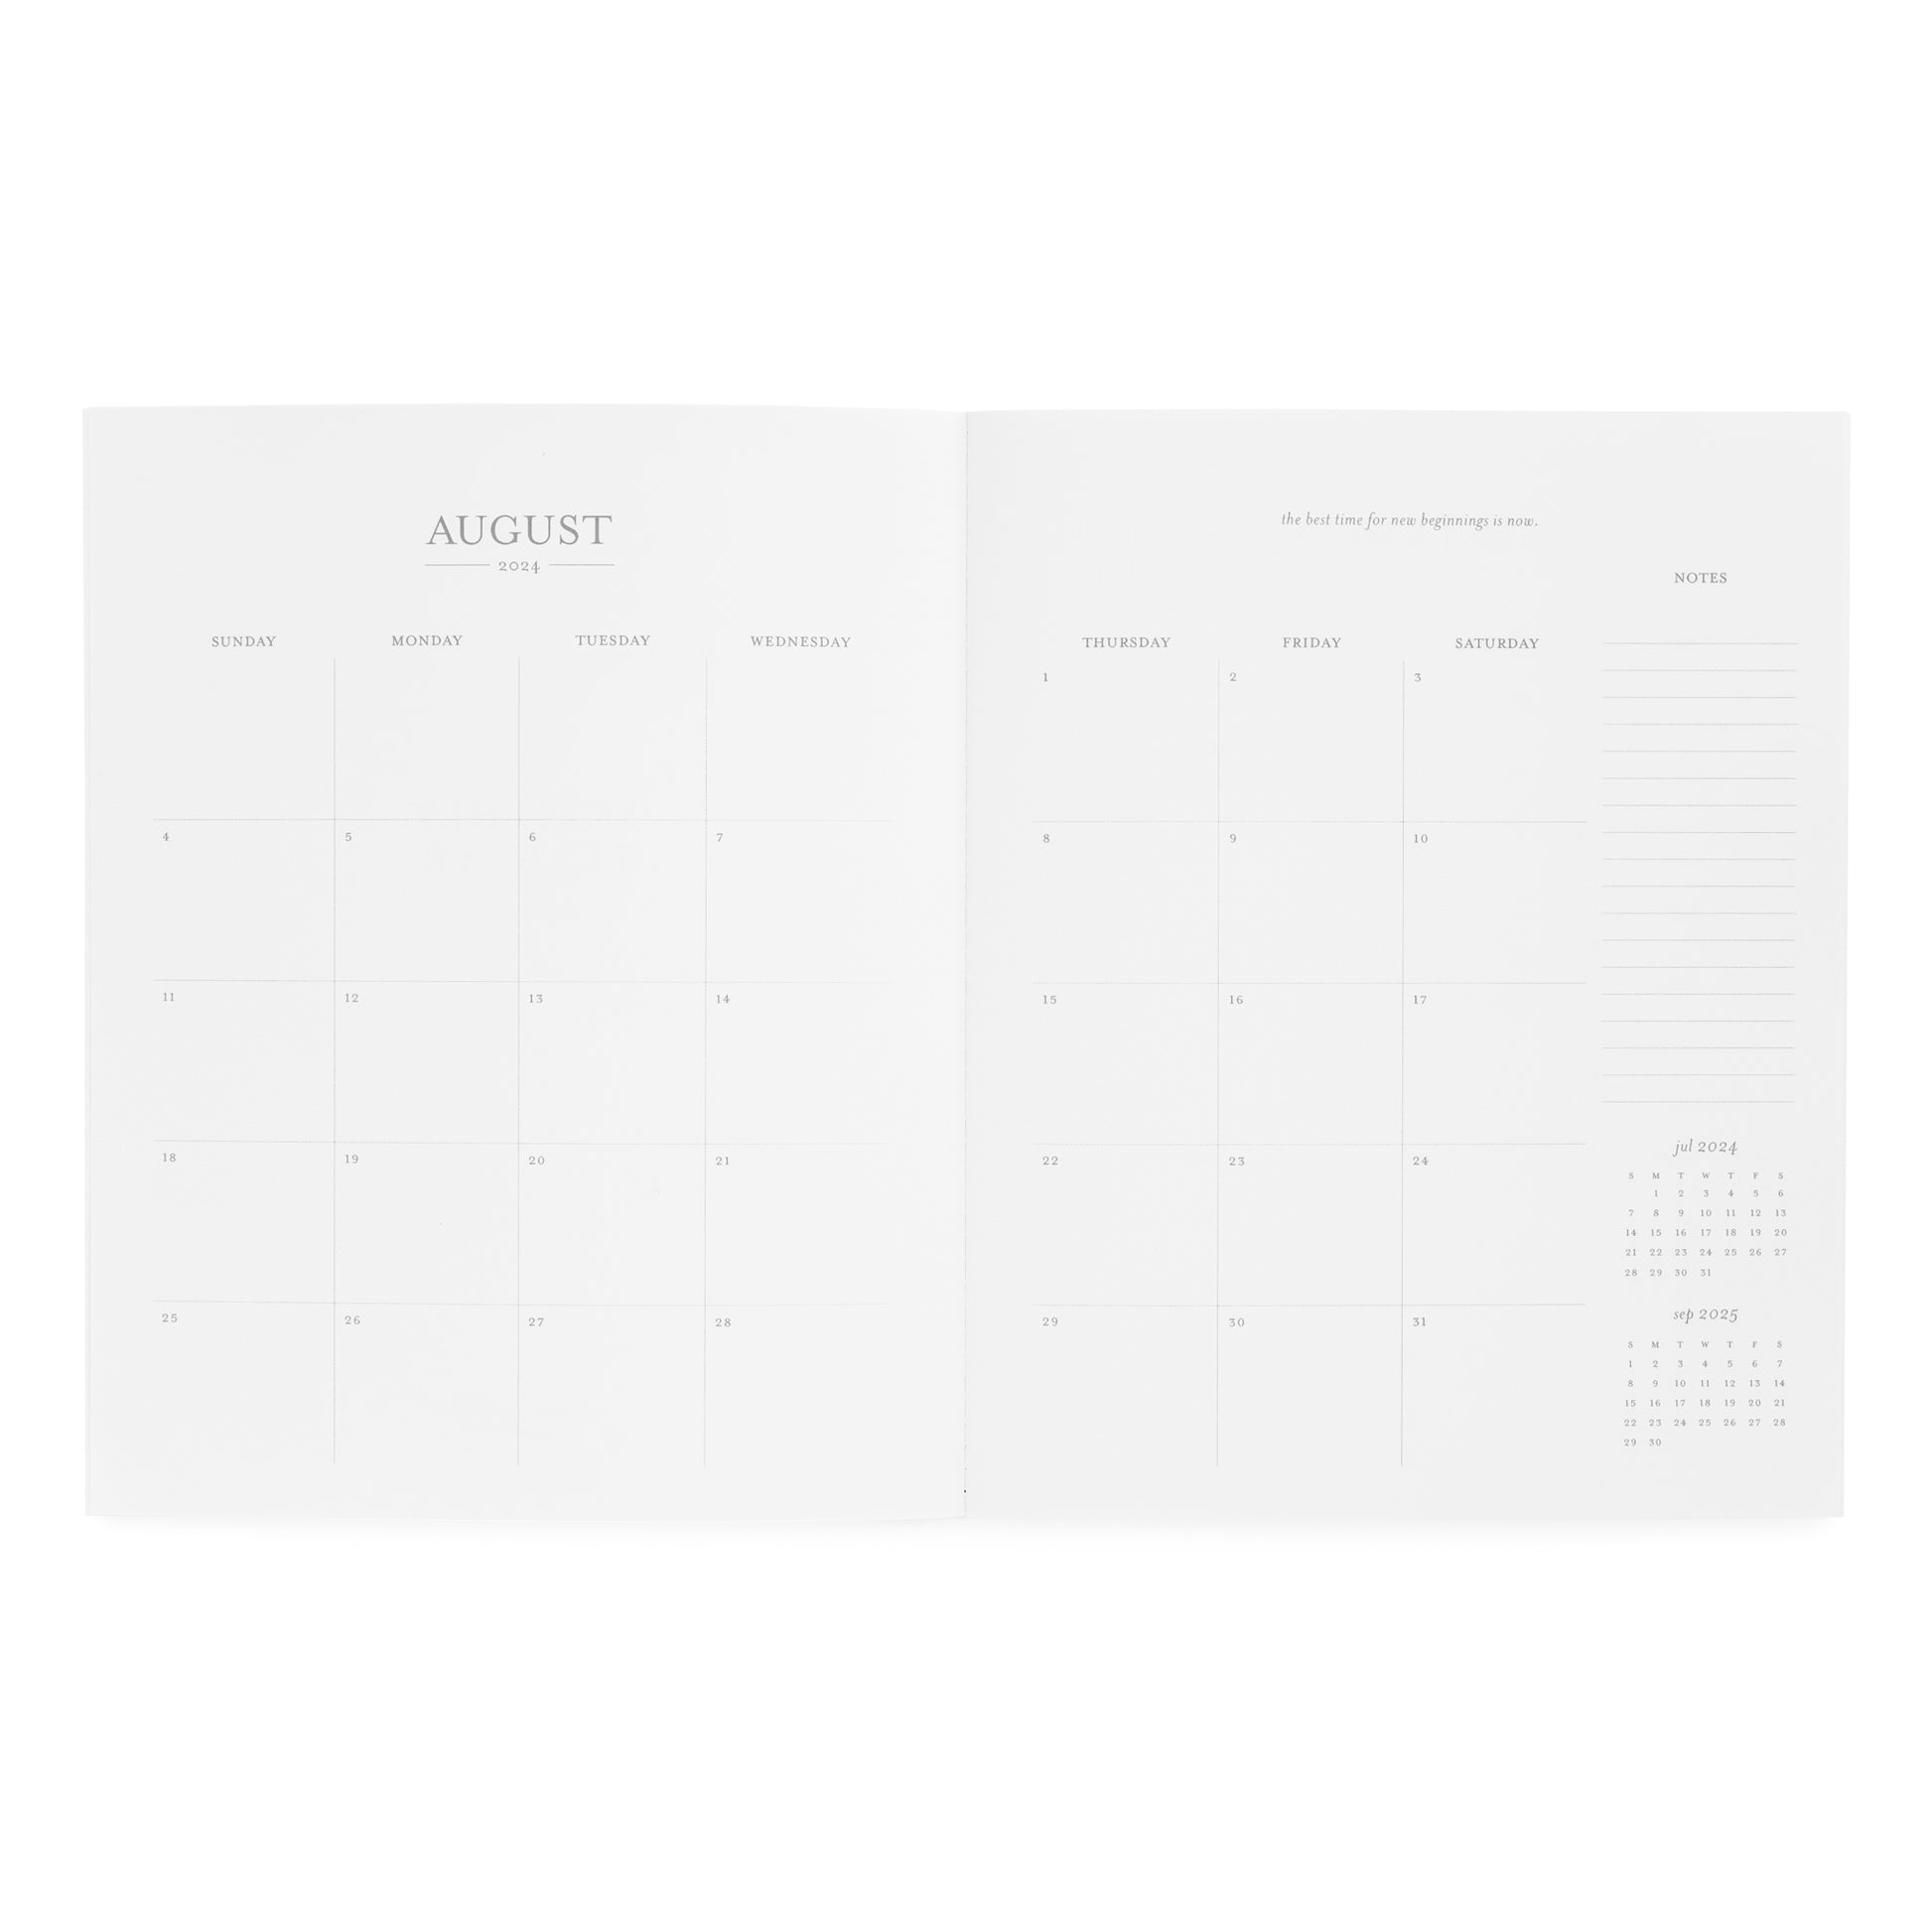 Monthly Calendar Grid with Notes Section on Side